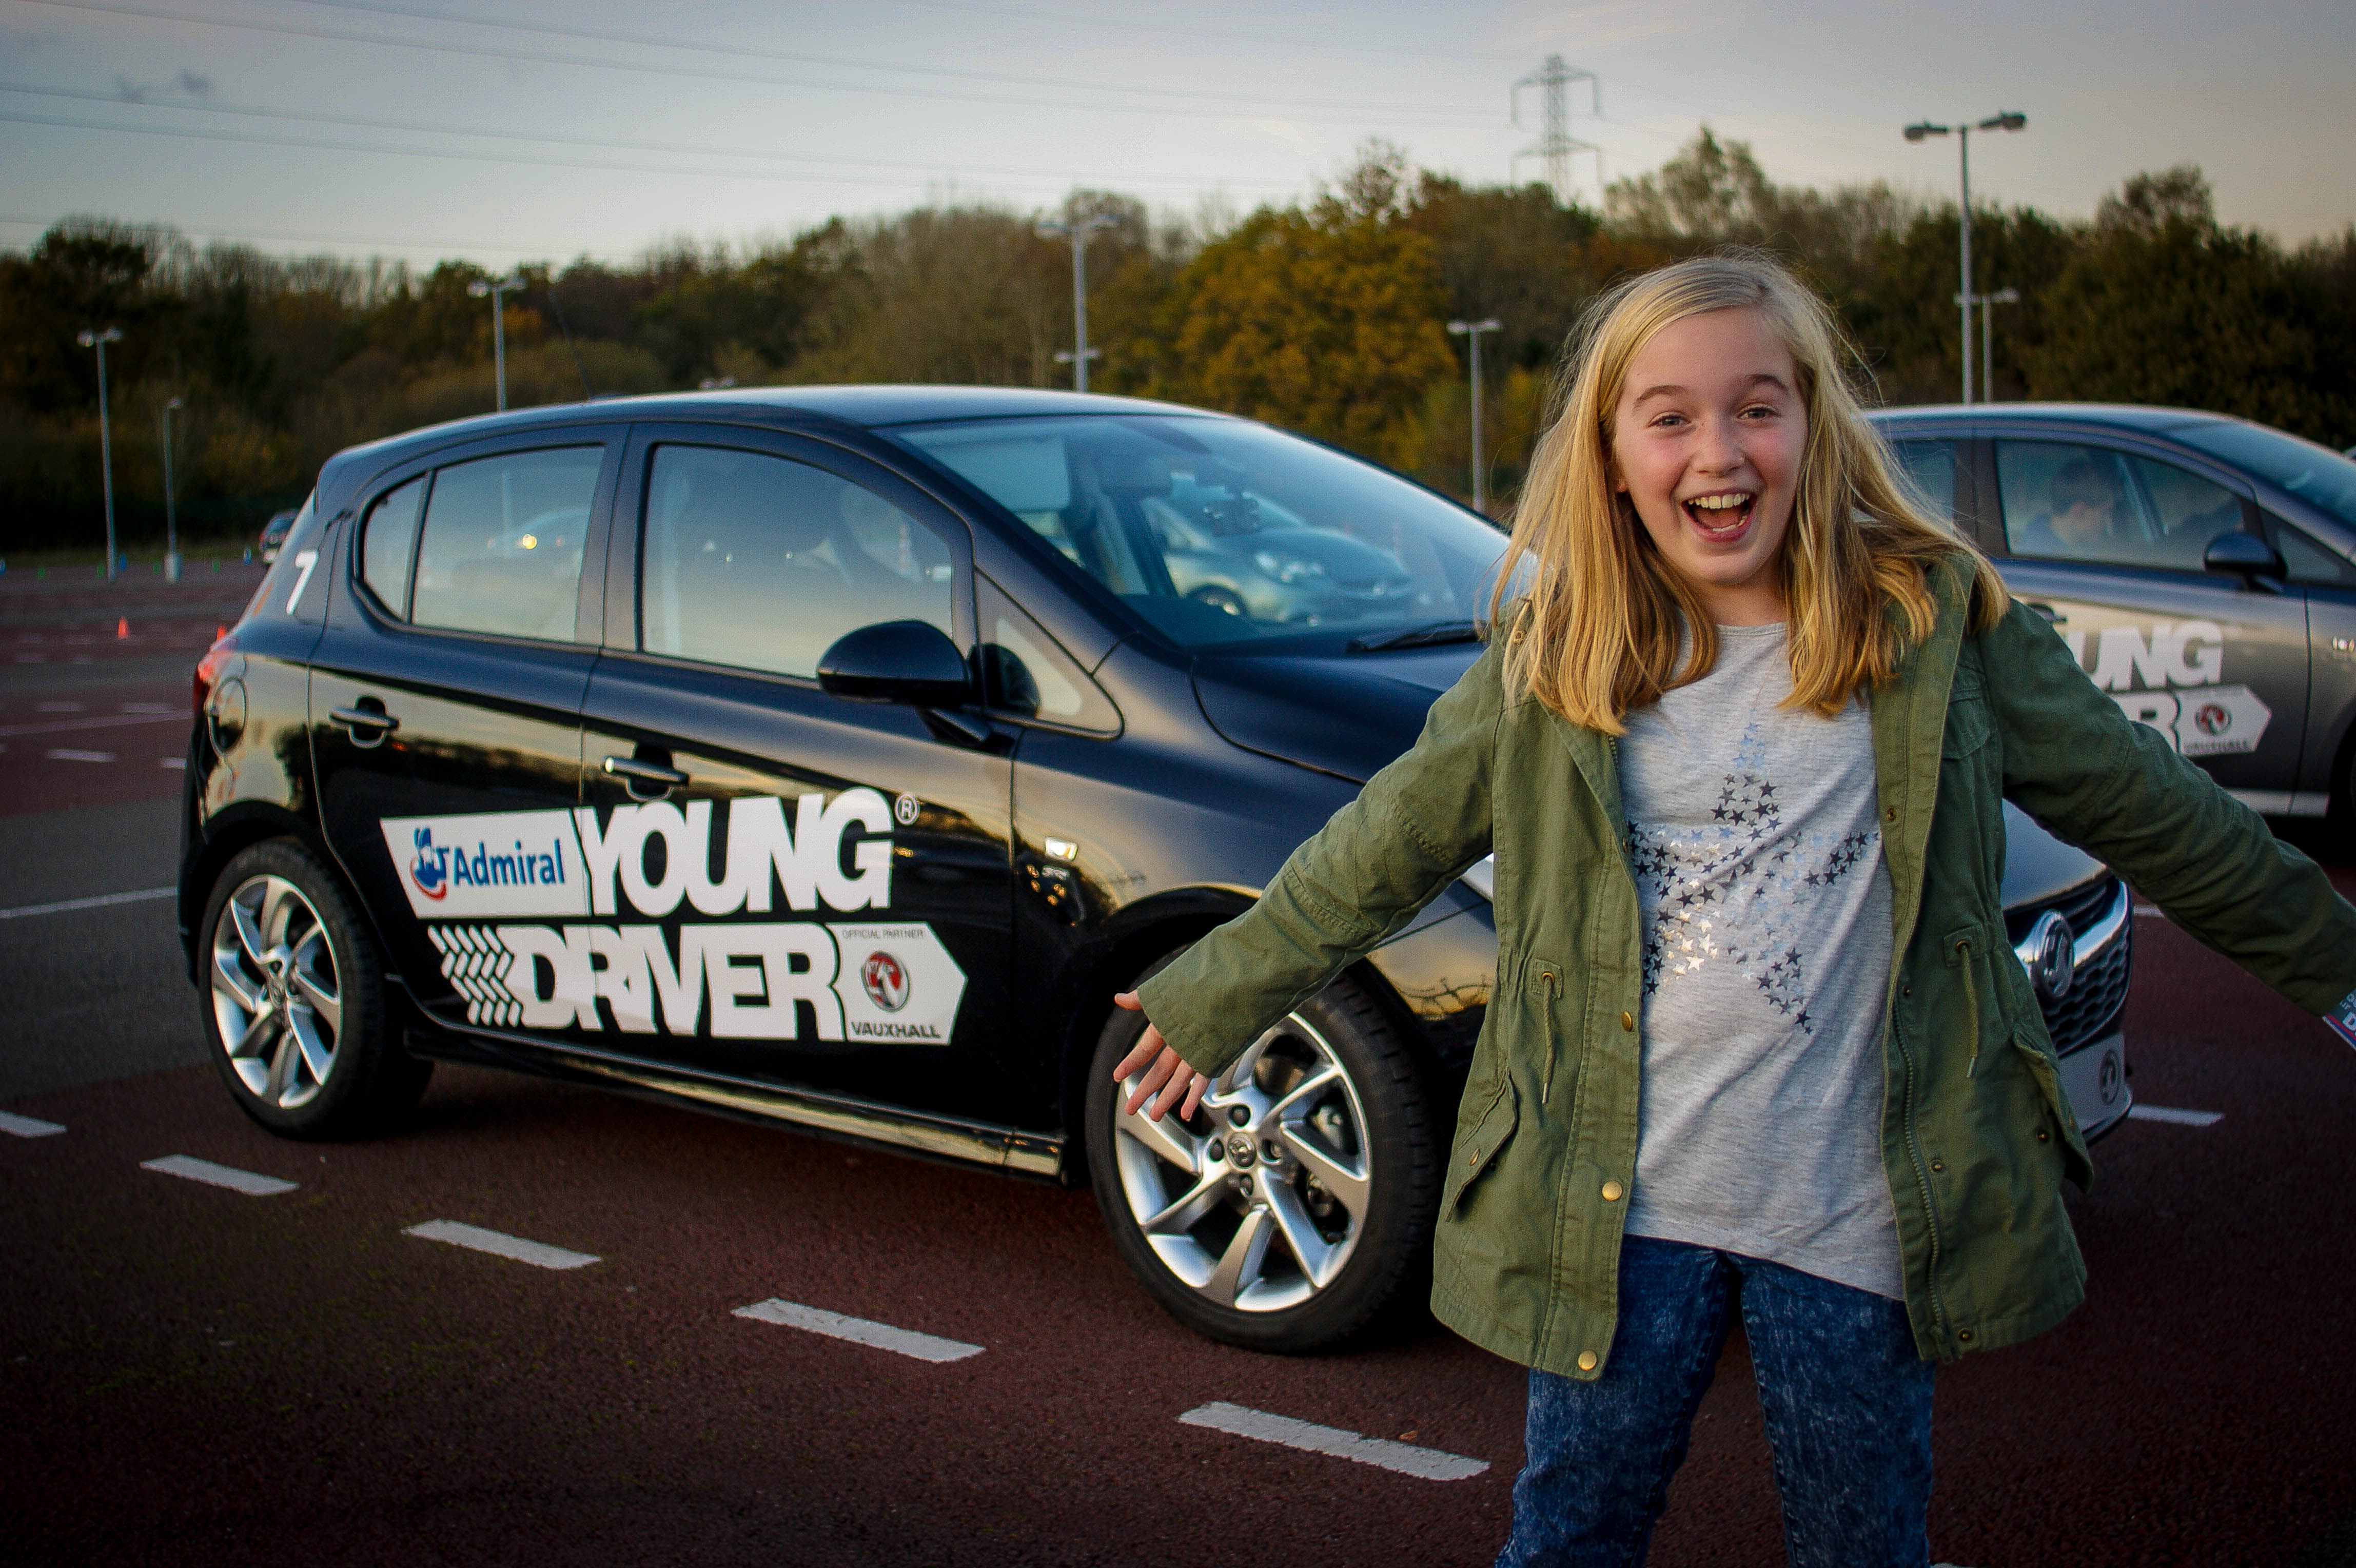 Young Driver, Young, driver, driving lesson, motoring, automotive, Vauxhall, car, cars, learning to drive, driving experience, motoring, automotive, Ford, Fiesta, Ford Fiesta, Vauxhall Corsa